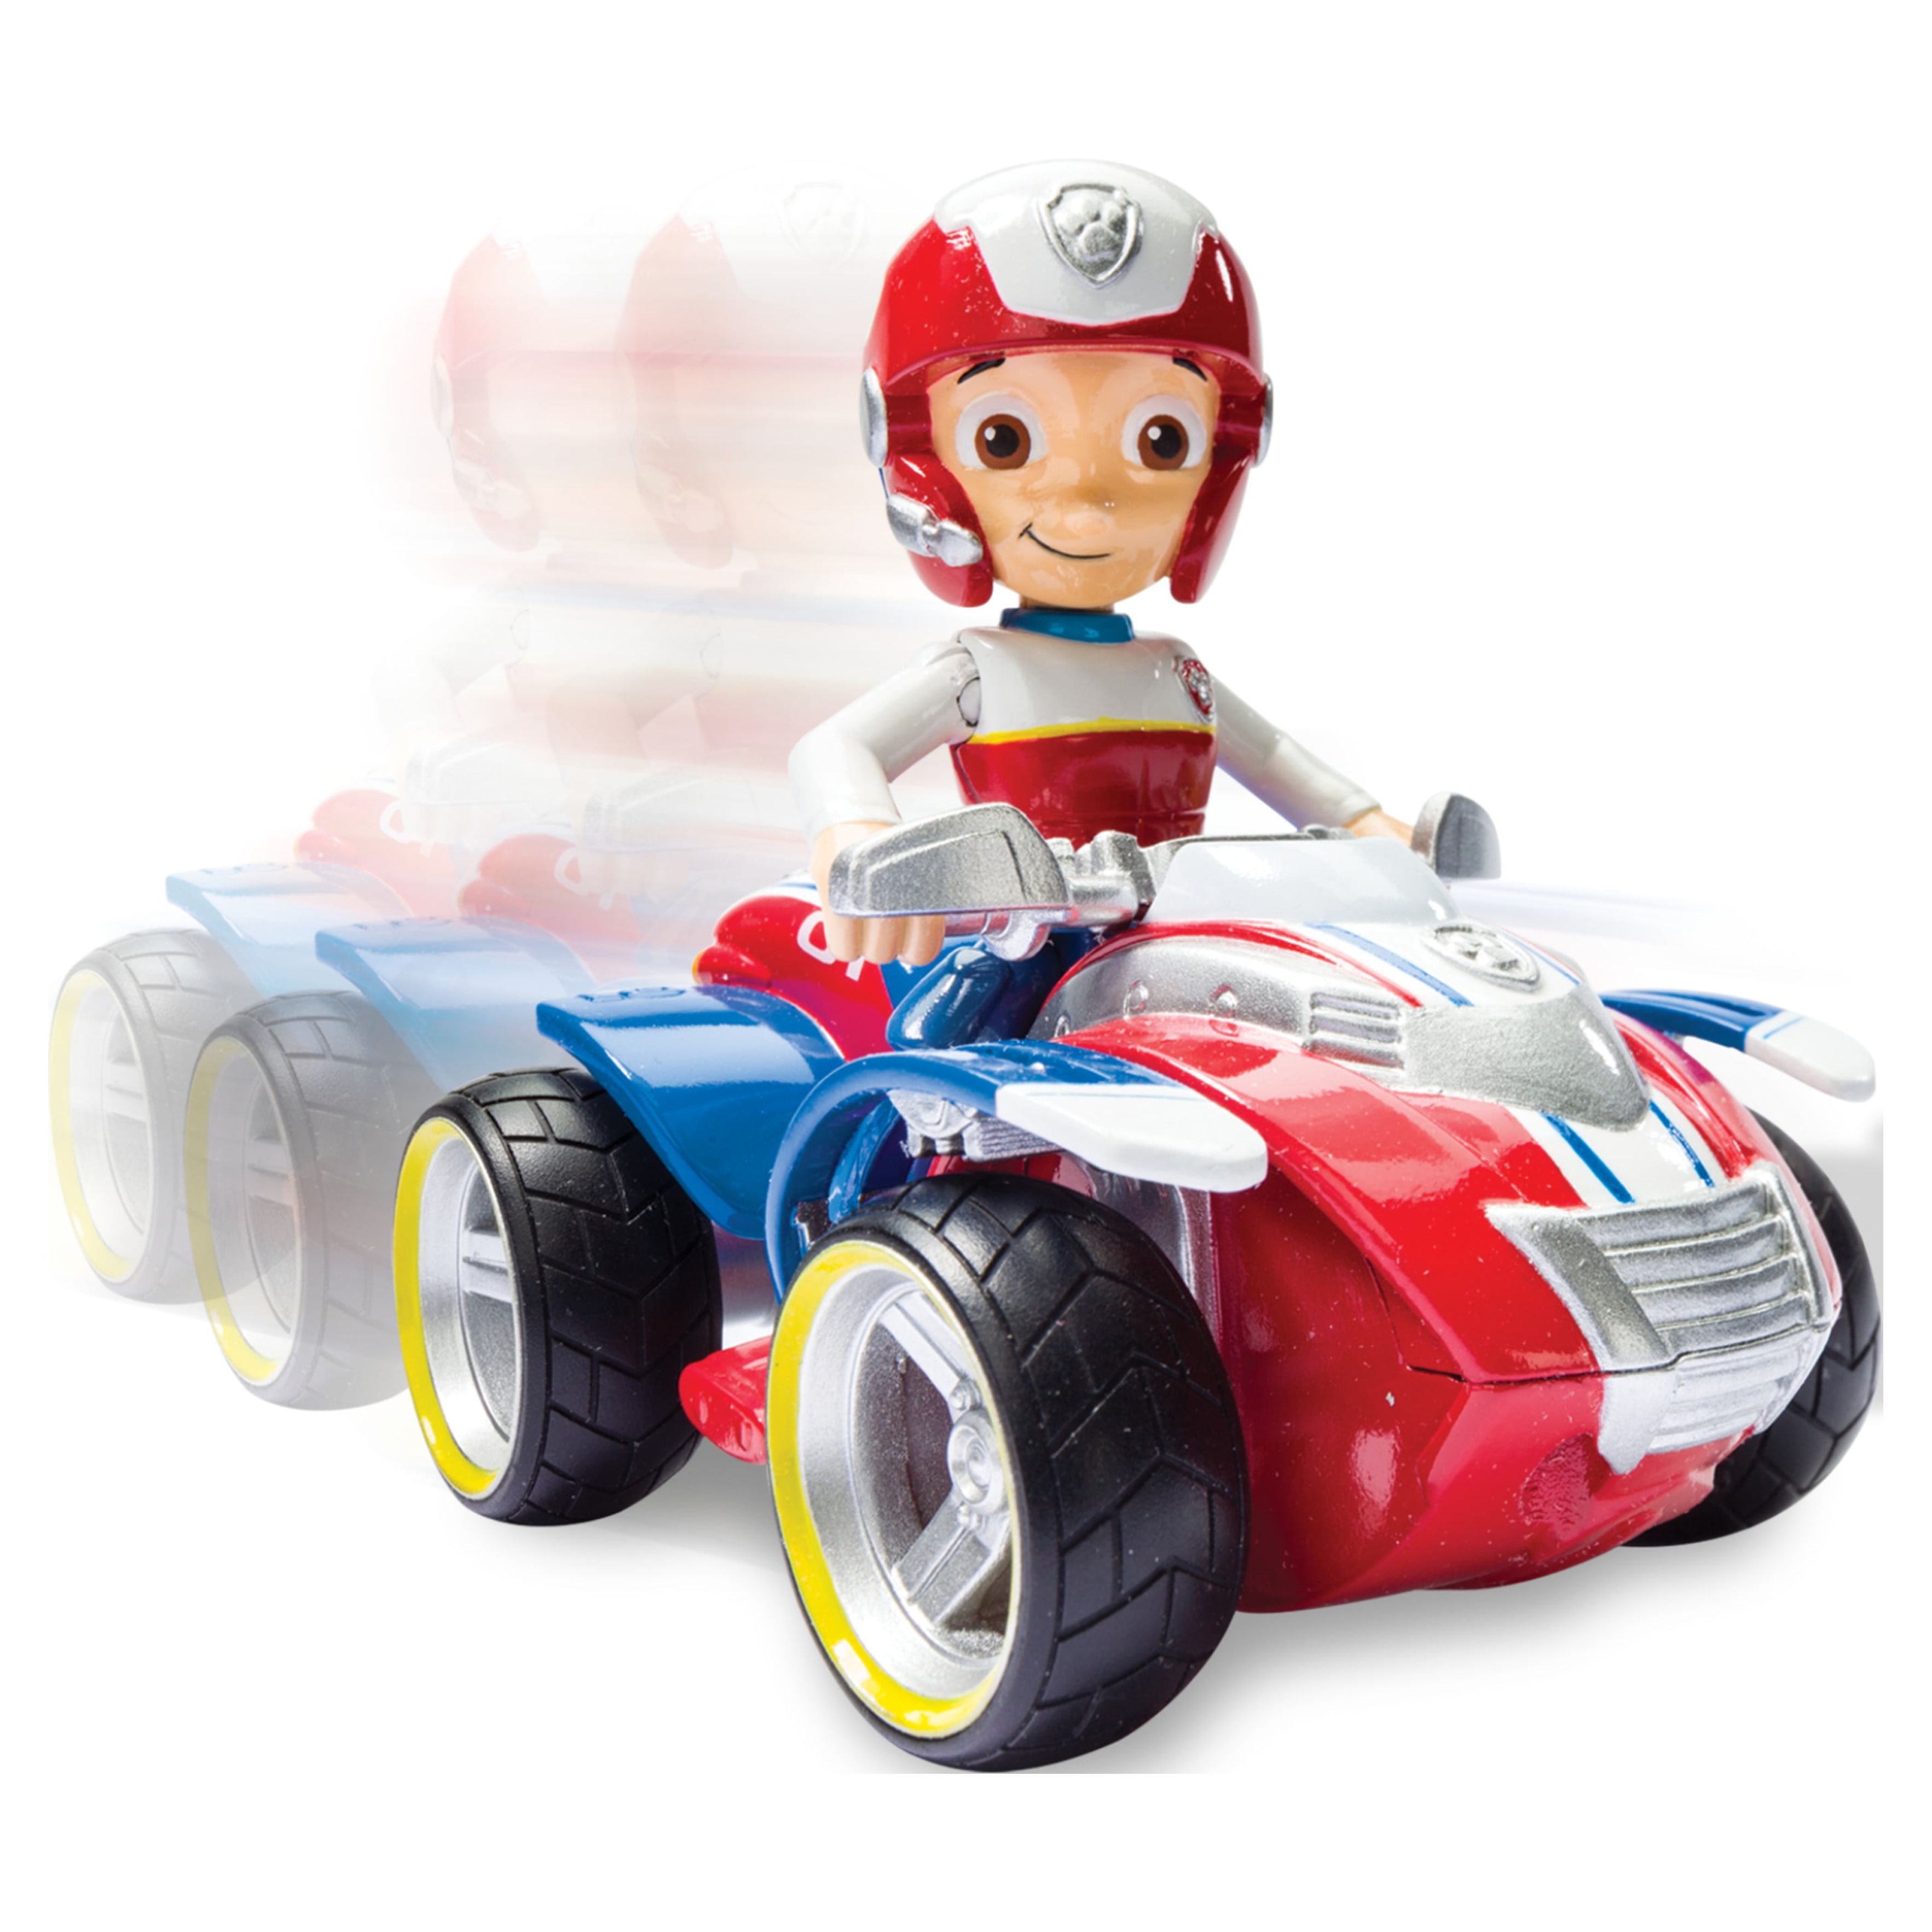 PAW Patrol Ryder's Rescue ATV, Vehicle and Figure, For Ages 3 and up - image 5 of 6